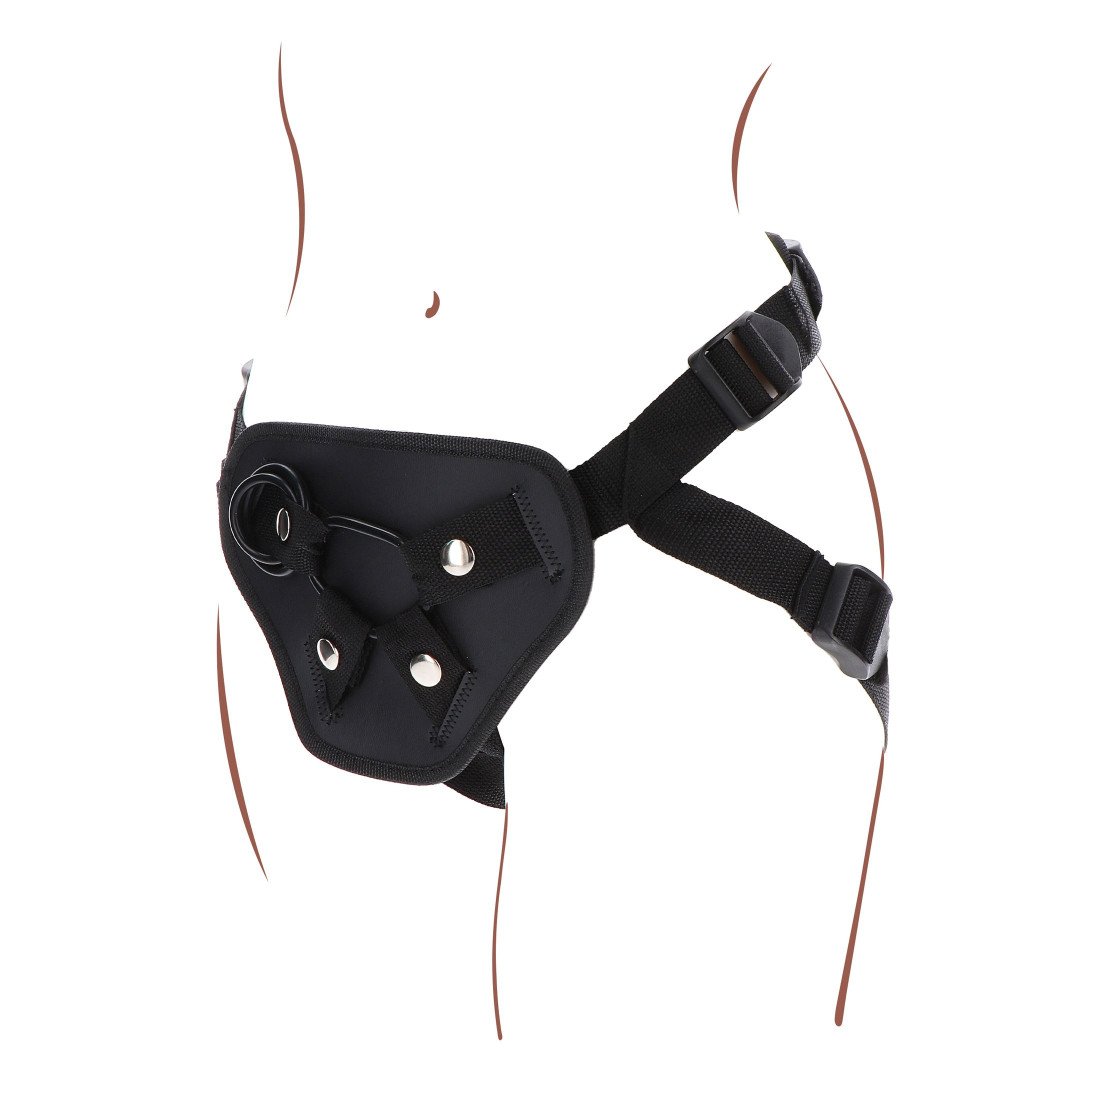 Diržai strap-on seksui „Strap-on Deluxe Harness“ - Get Real